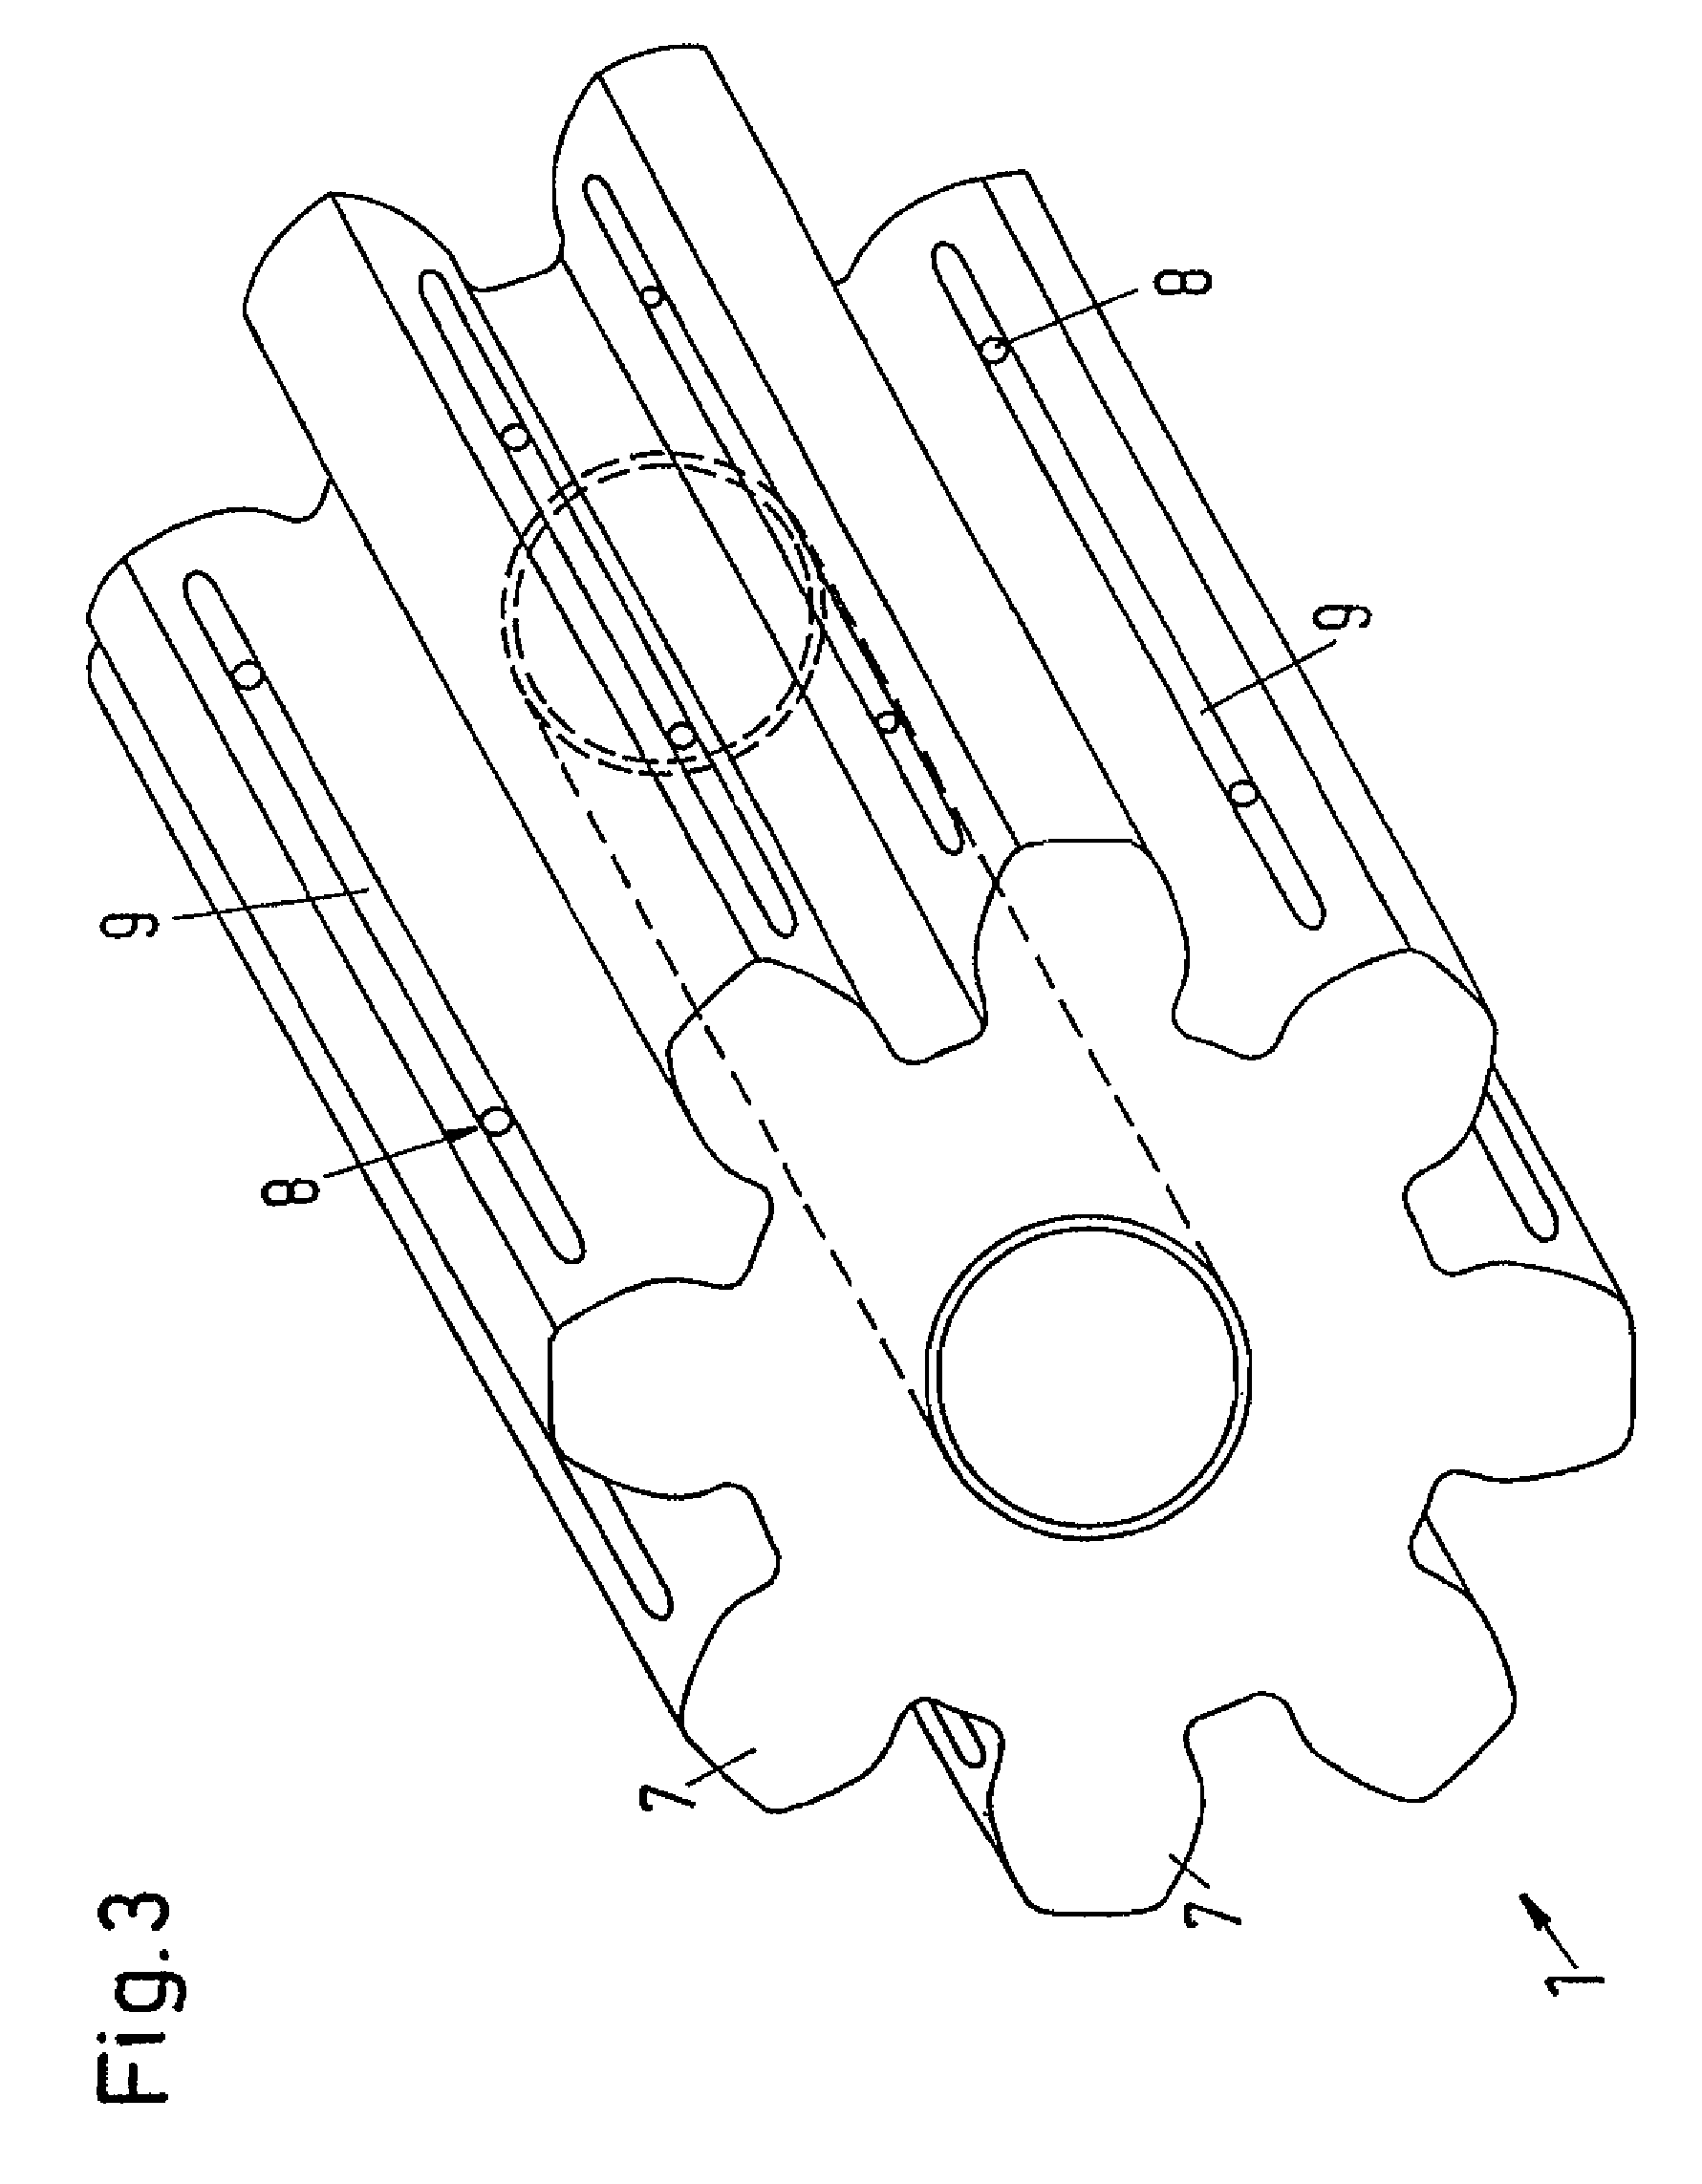 Lubricating device with lubricating pinion